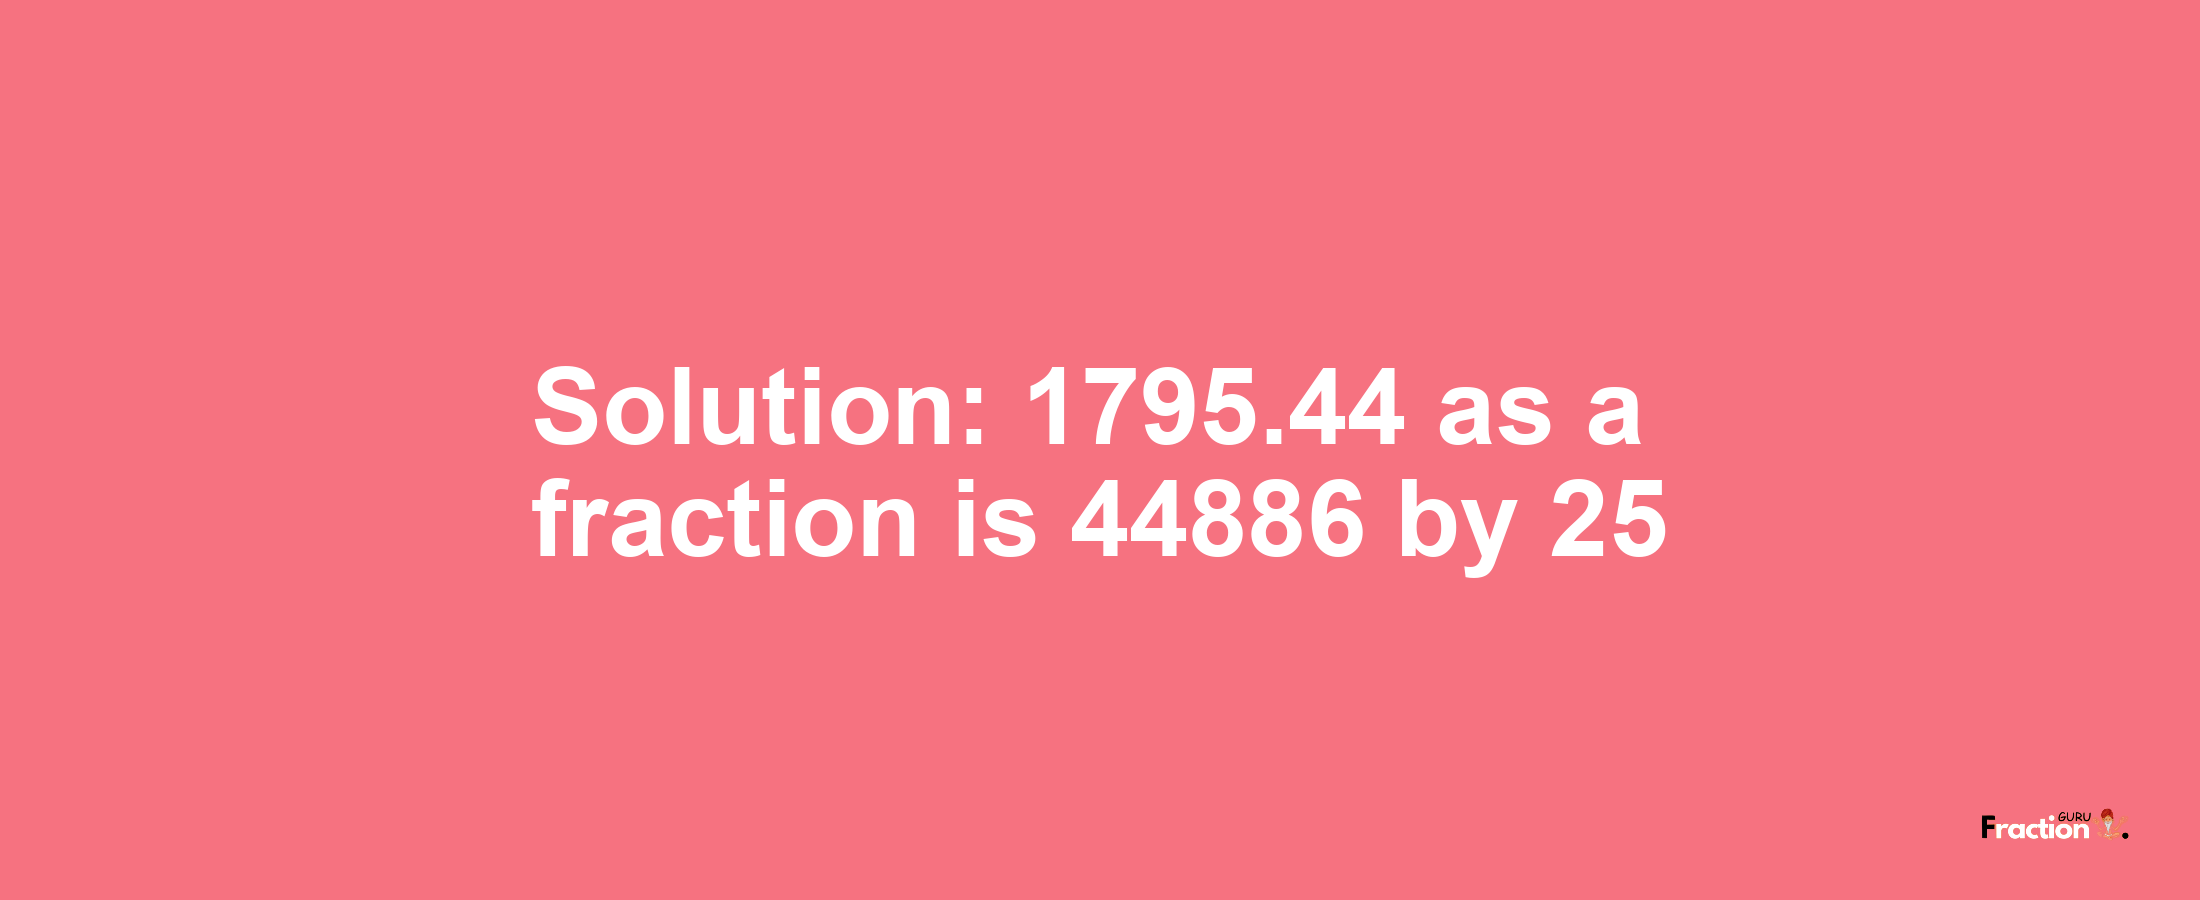 Solution:1795.44 as a fraction is 44886/25